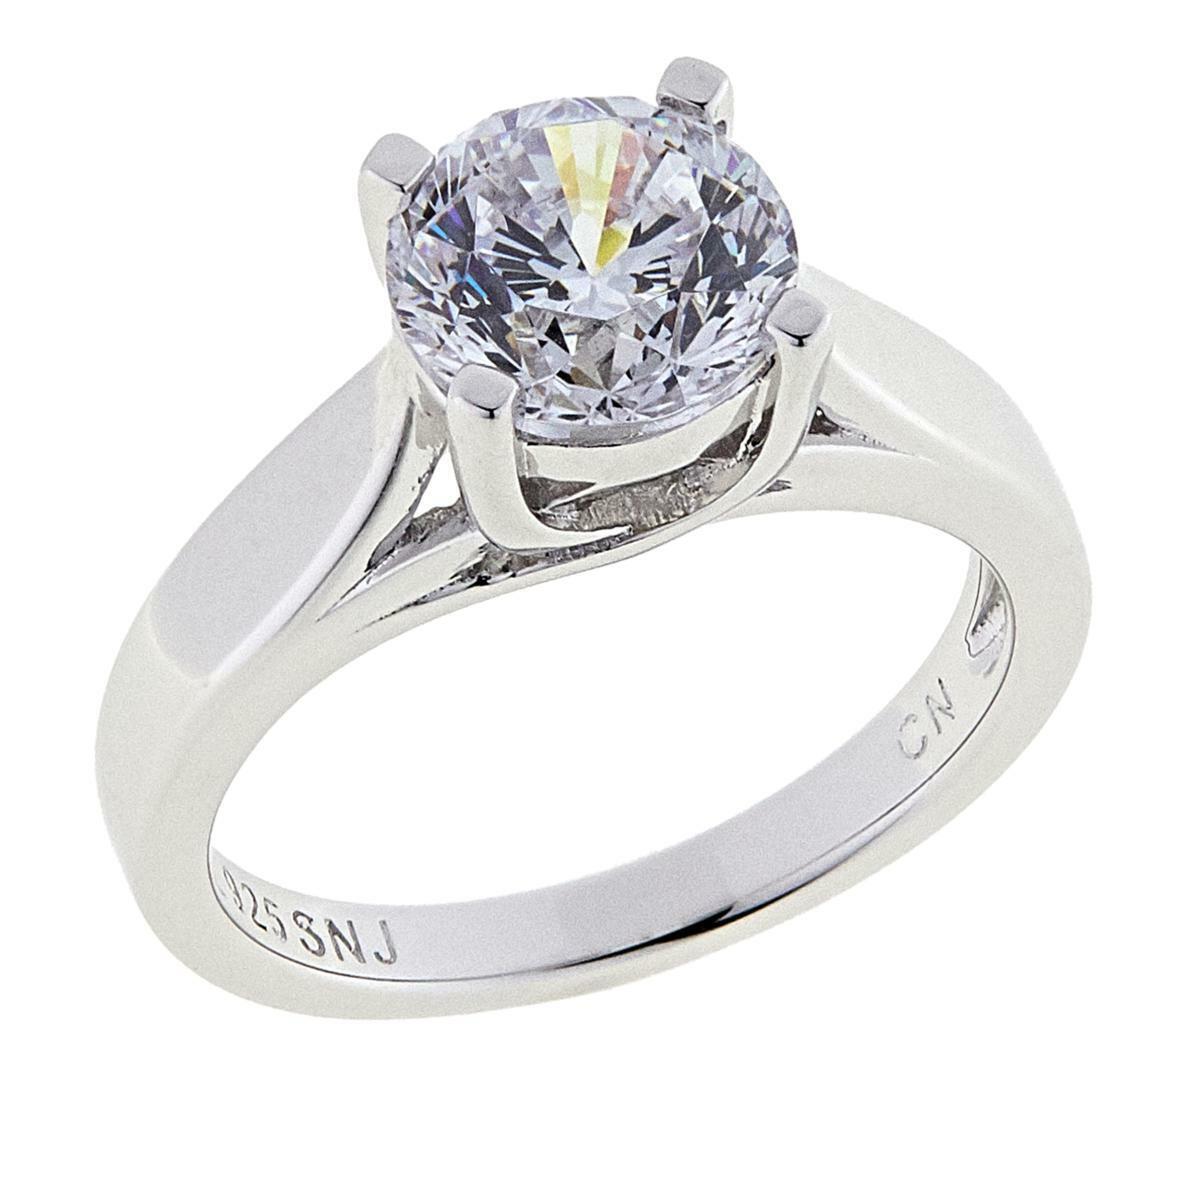 Absolute 2cttw CZ Aurora Star 101 Facets Platinum-Plated Solitaire Ring, Size 6